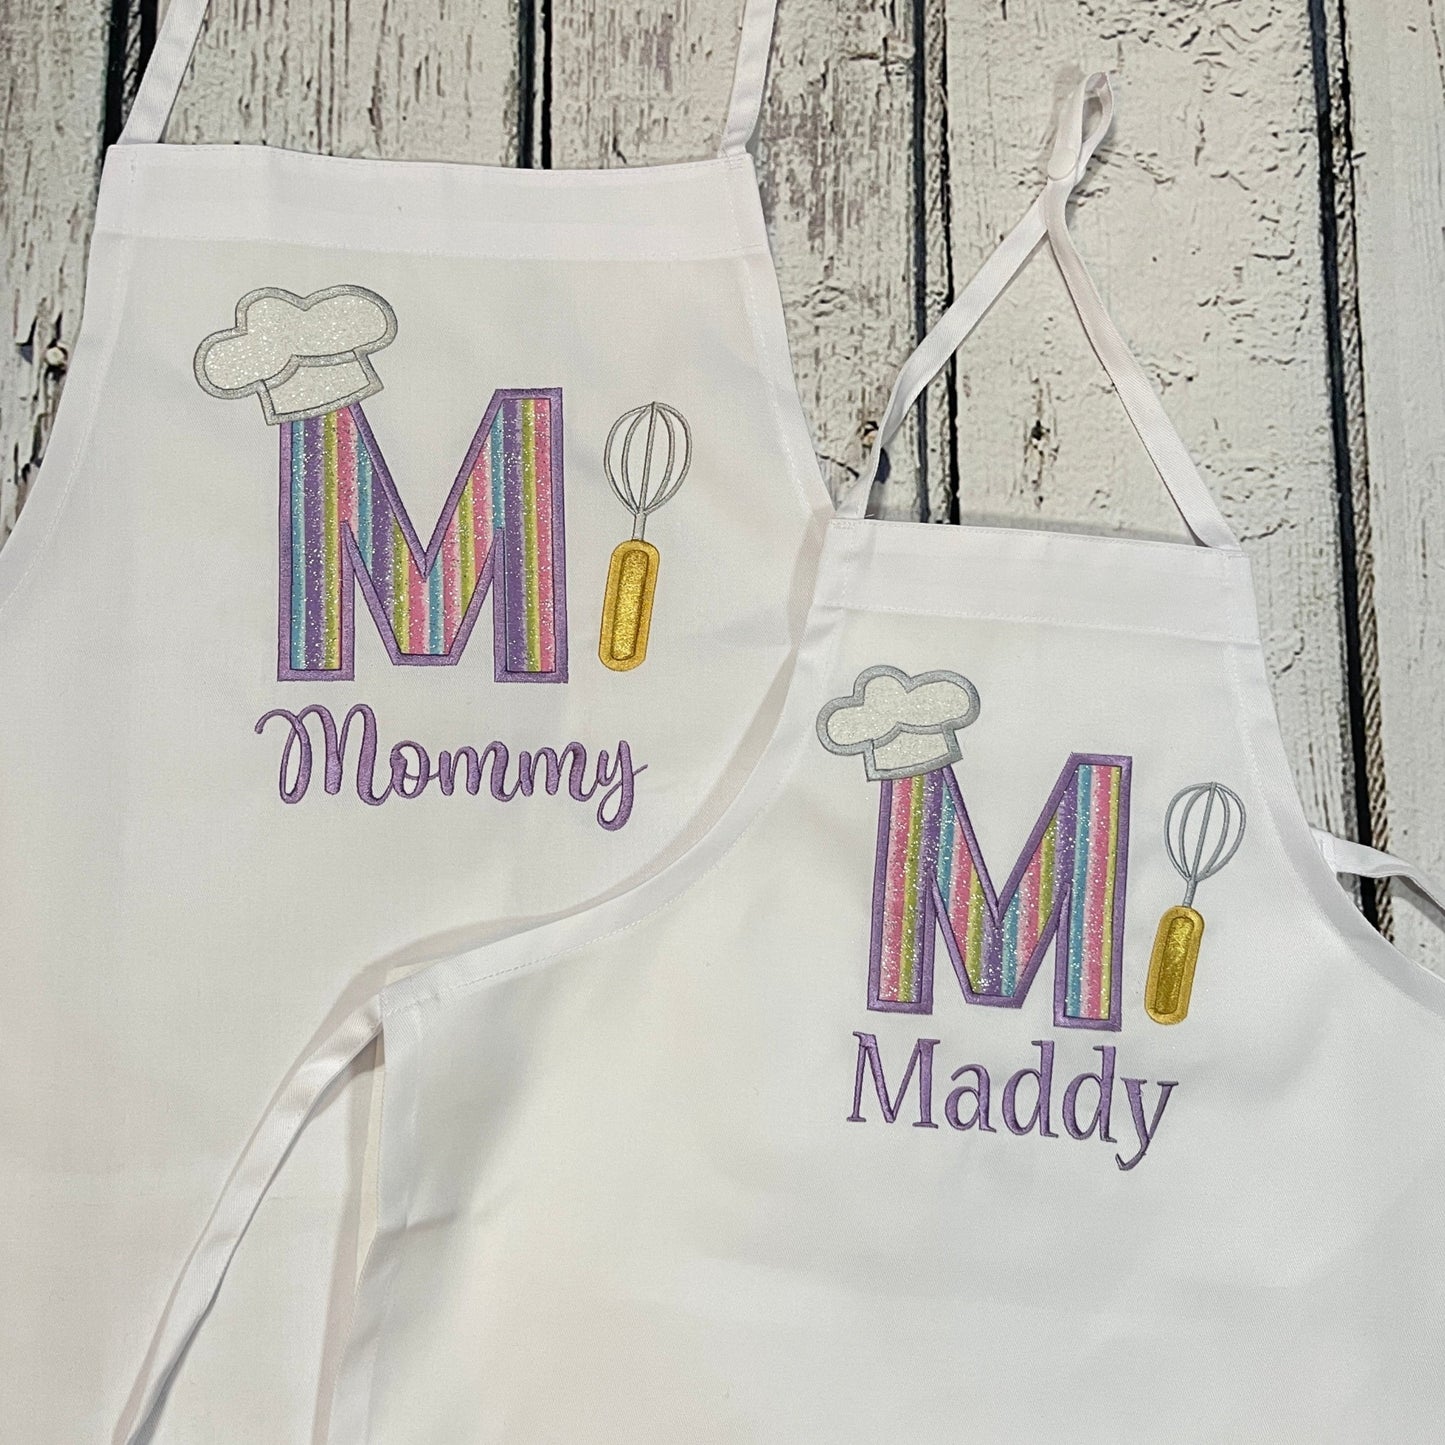 Personalized embroidered Mother Daughter matching apron set